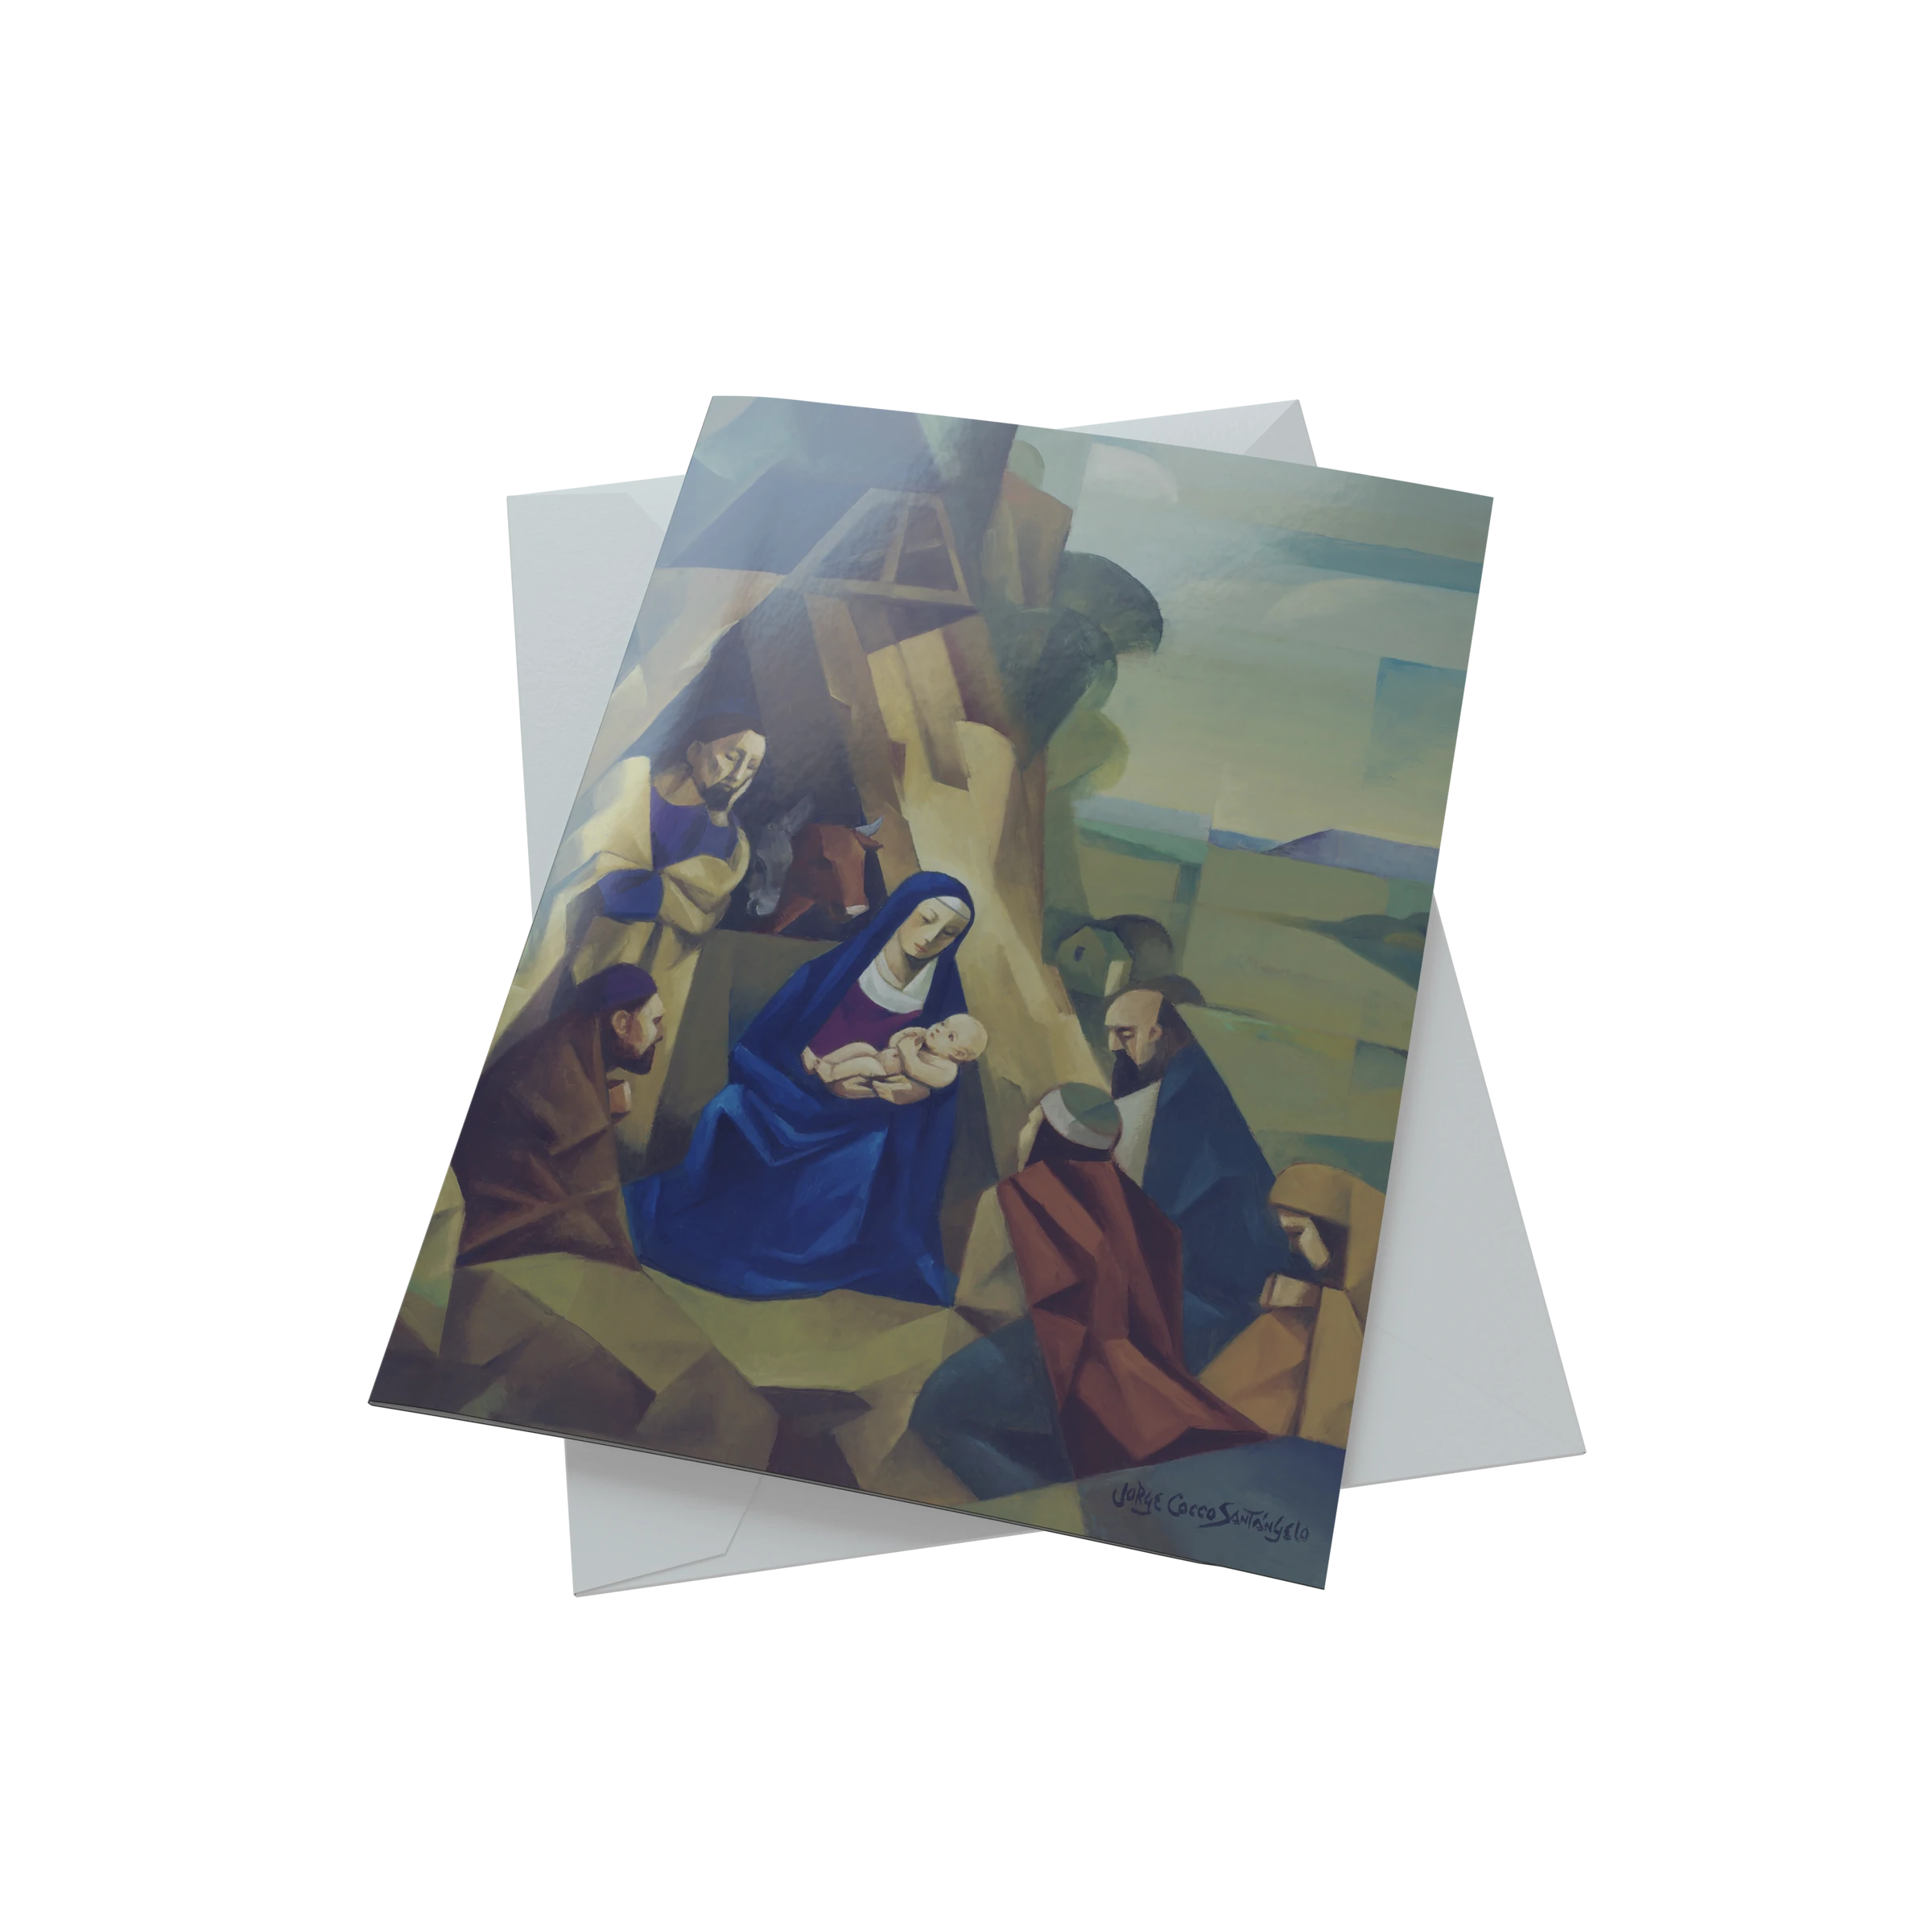 AF - Card Pack - Jorge Cocco "Nativity" Boxed Christmas Cards (20 Each of 1 Design)<BR>ジョージ・コッコ画　キリストの生誕カードパック